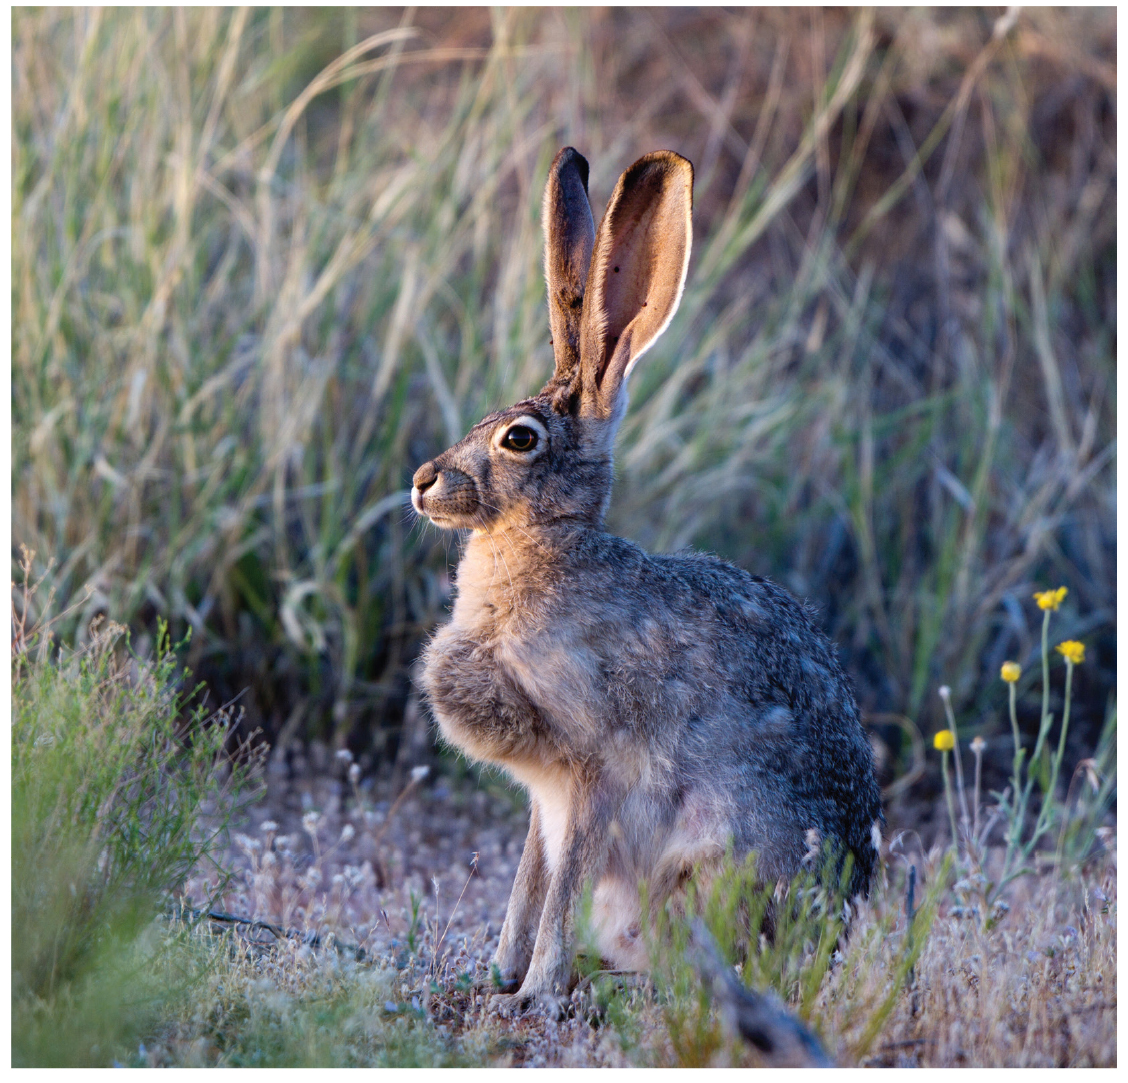 Fig. 01: Photograph of a black-tailed jackrabbit.